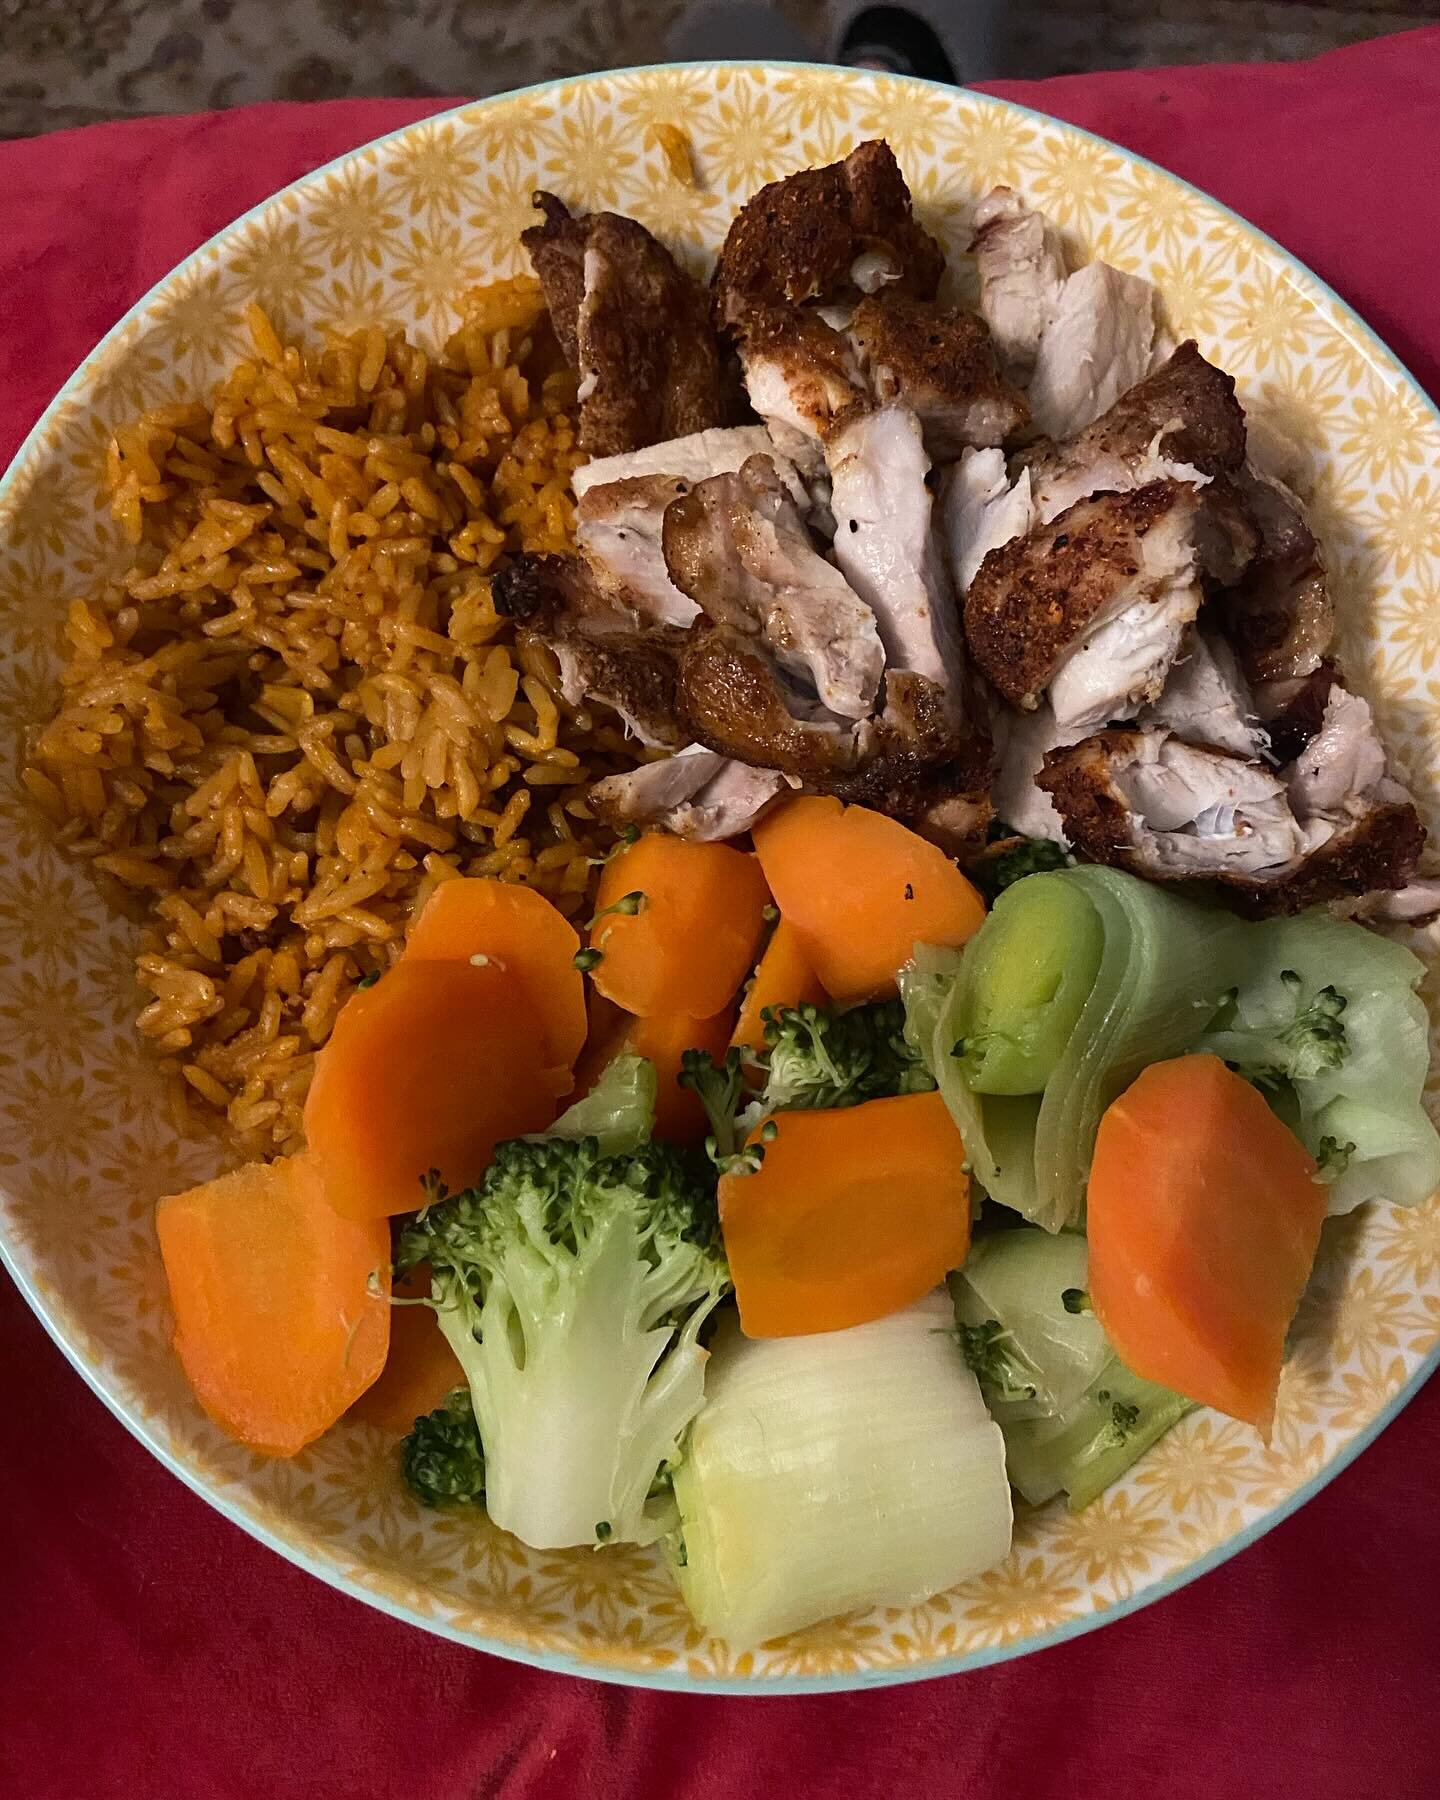 Cajun chicken, spicy rice and veg 👌

Simple, quick and tasty 💪🏻

Healthy eating doesn&rsquo;t have to be complicated ☺️

#healthydinner #mealideas #healthymealideas #chickenrecipie #ricerecepies #unclebens #fatlossmealplans #fatlossmealideas #simp